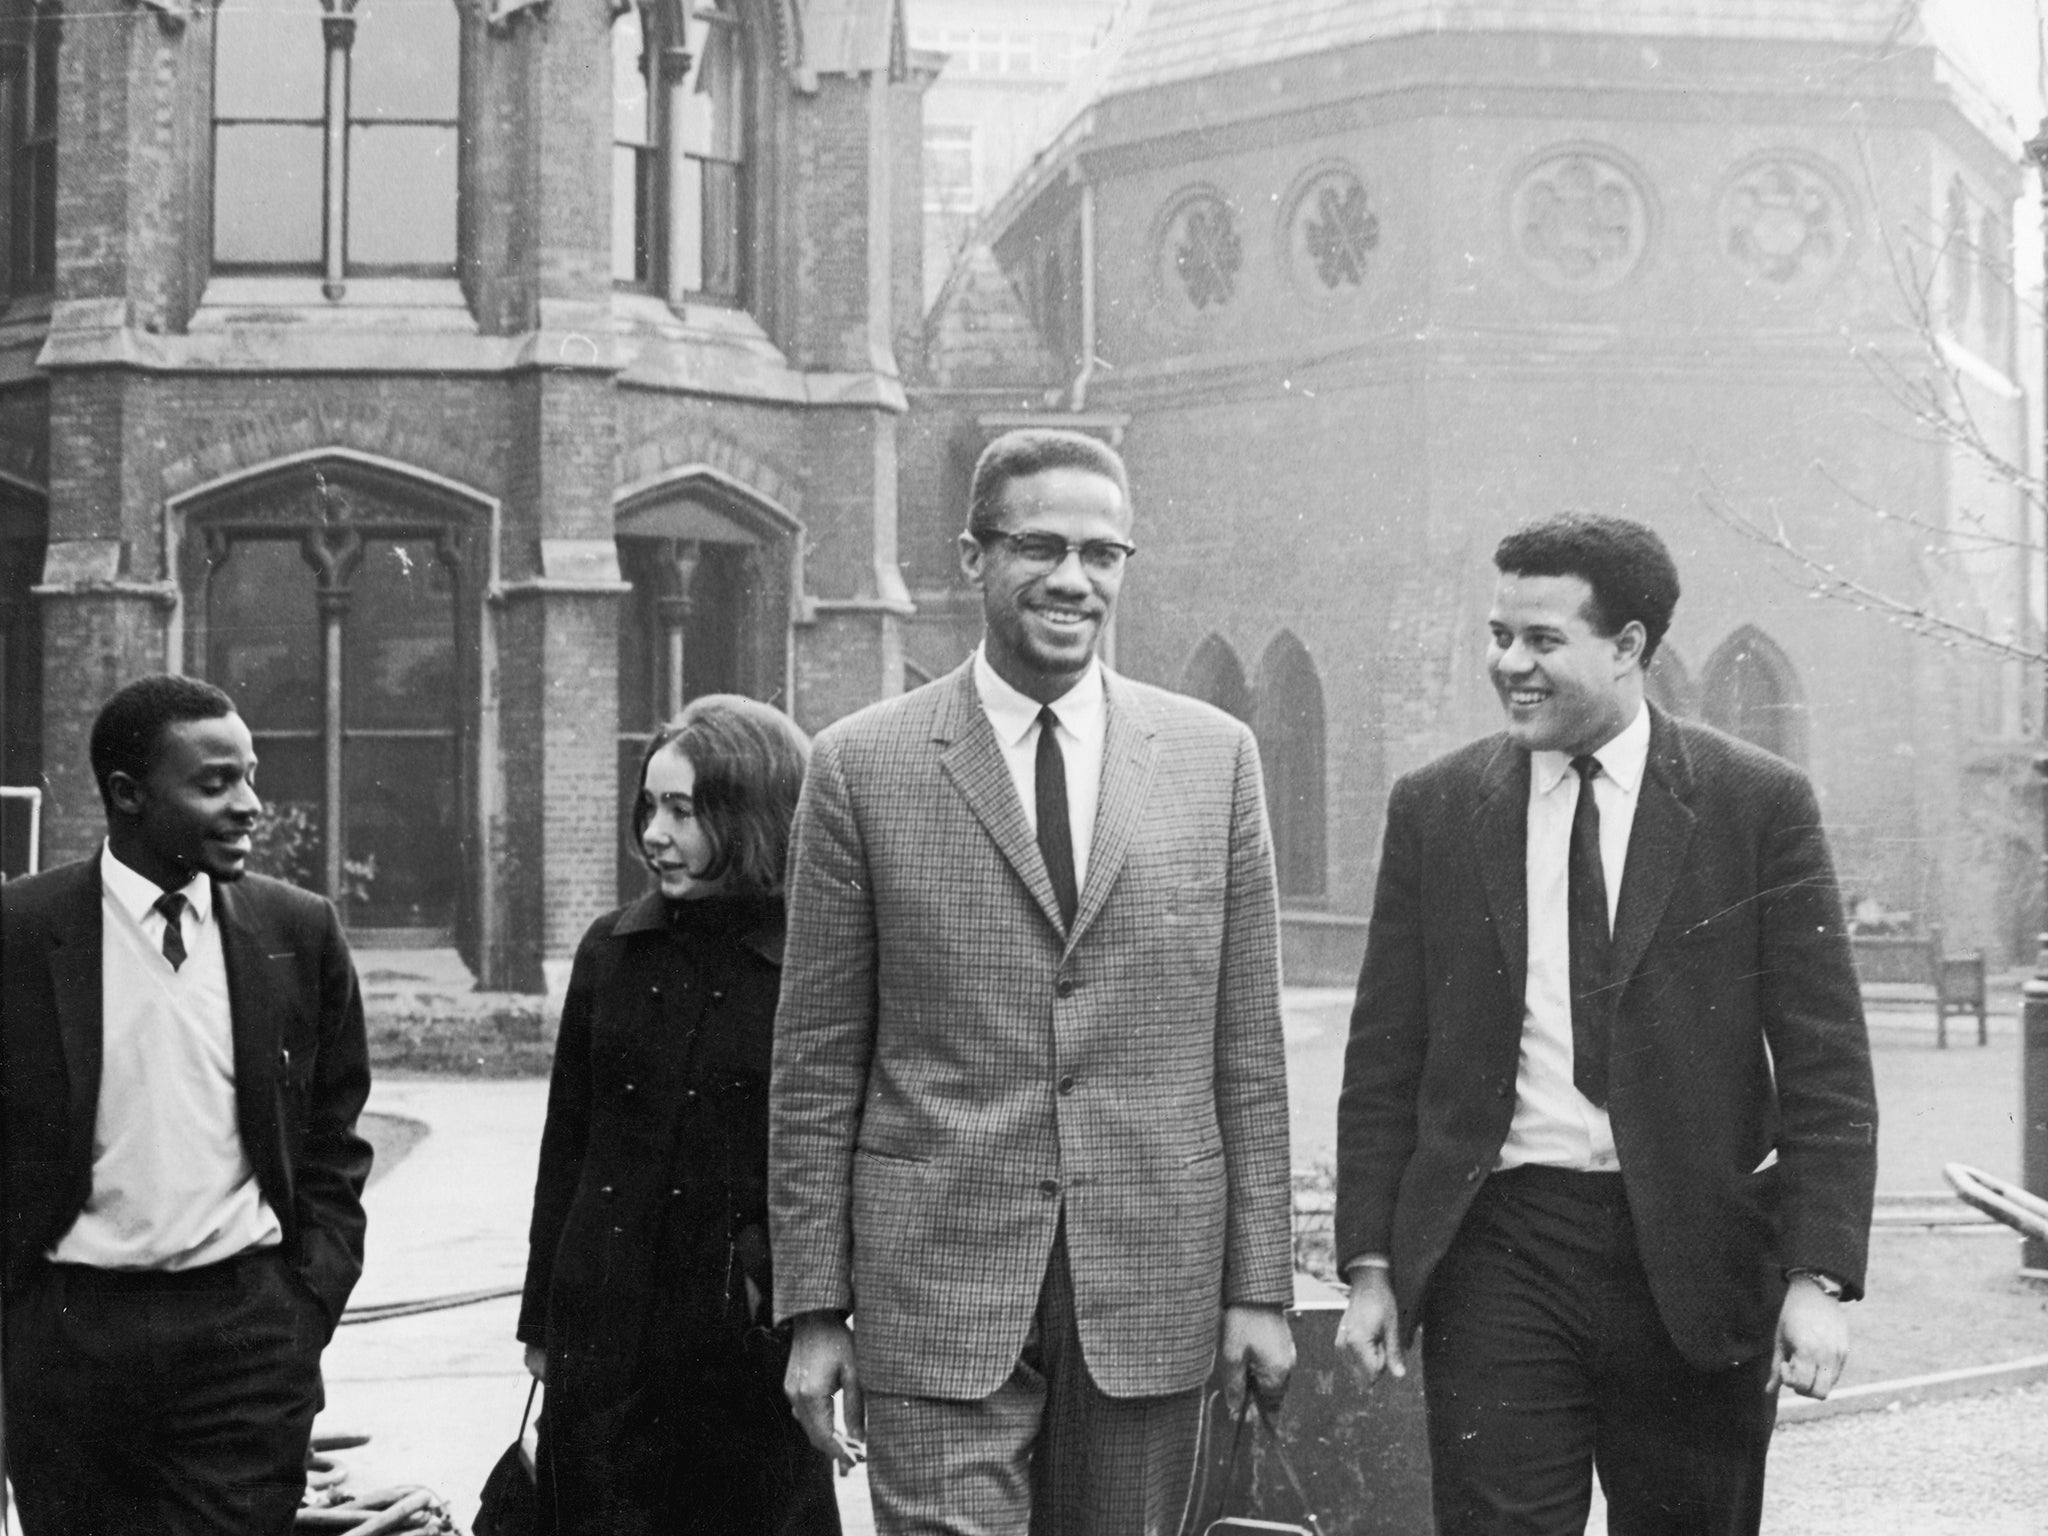 Black Nationalist leader and Nation of Islam spokesman Malcolm X in Oxford with Eric Abrahams, right, the Student Union president, before addressing university students on the subject of extremism in1964. (Photo by Keystone/Hulton Archive/Getty Images)